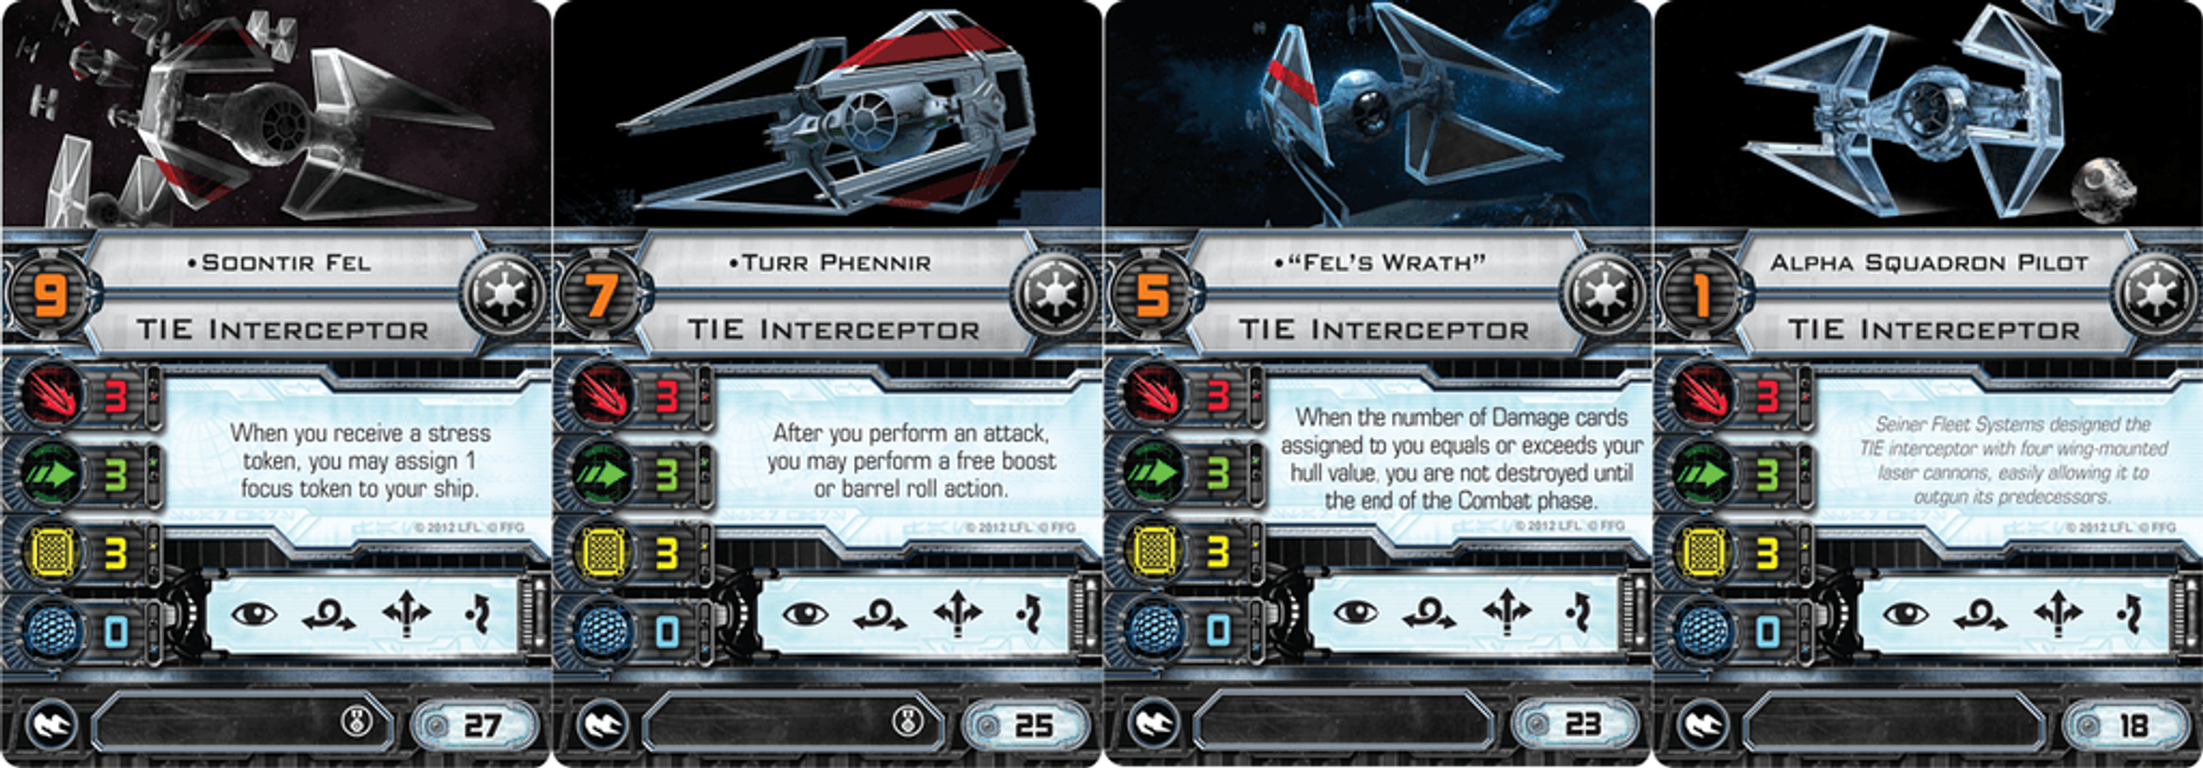 Star Wars: X-Wing Miniatures Game - TIE Interceptor Expansion Pack cards